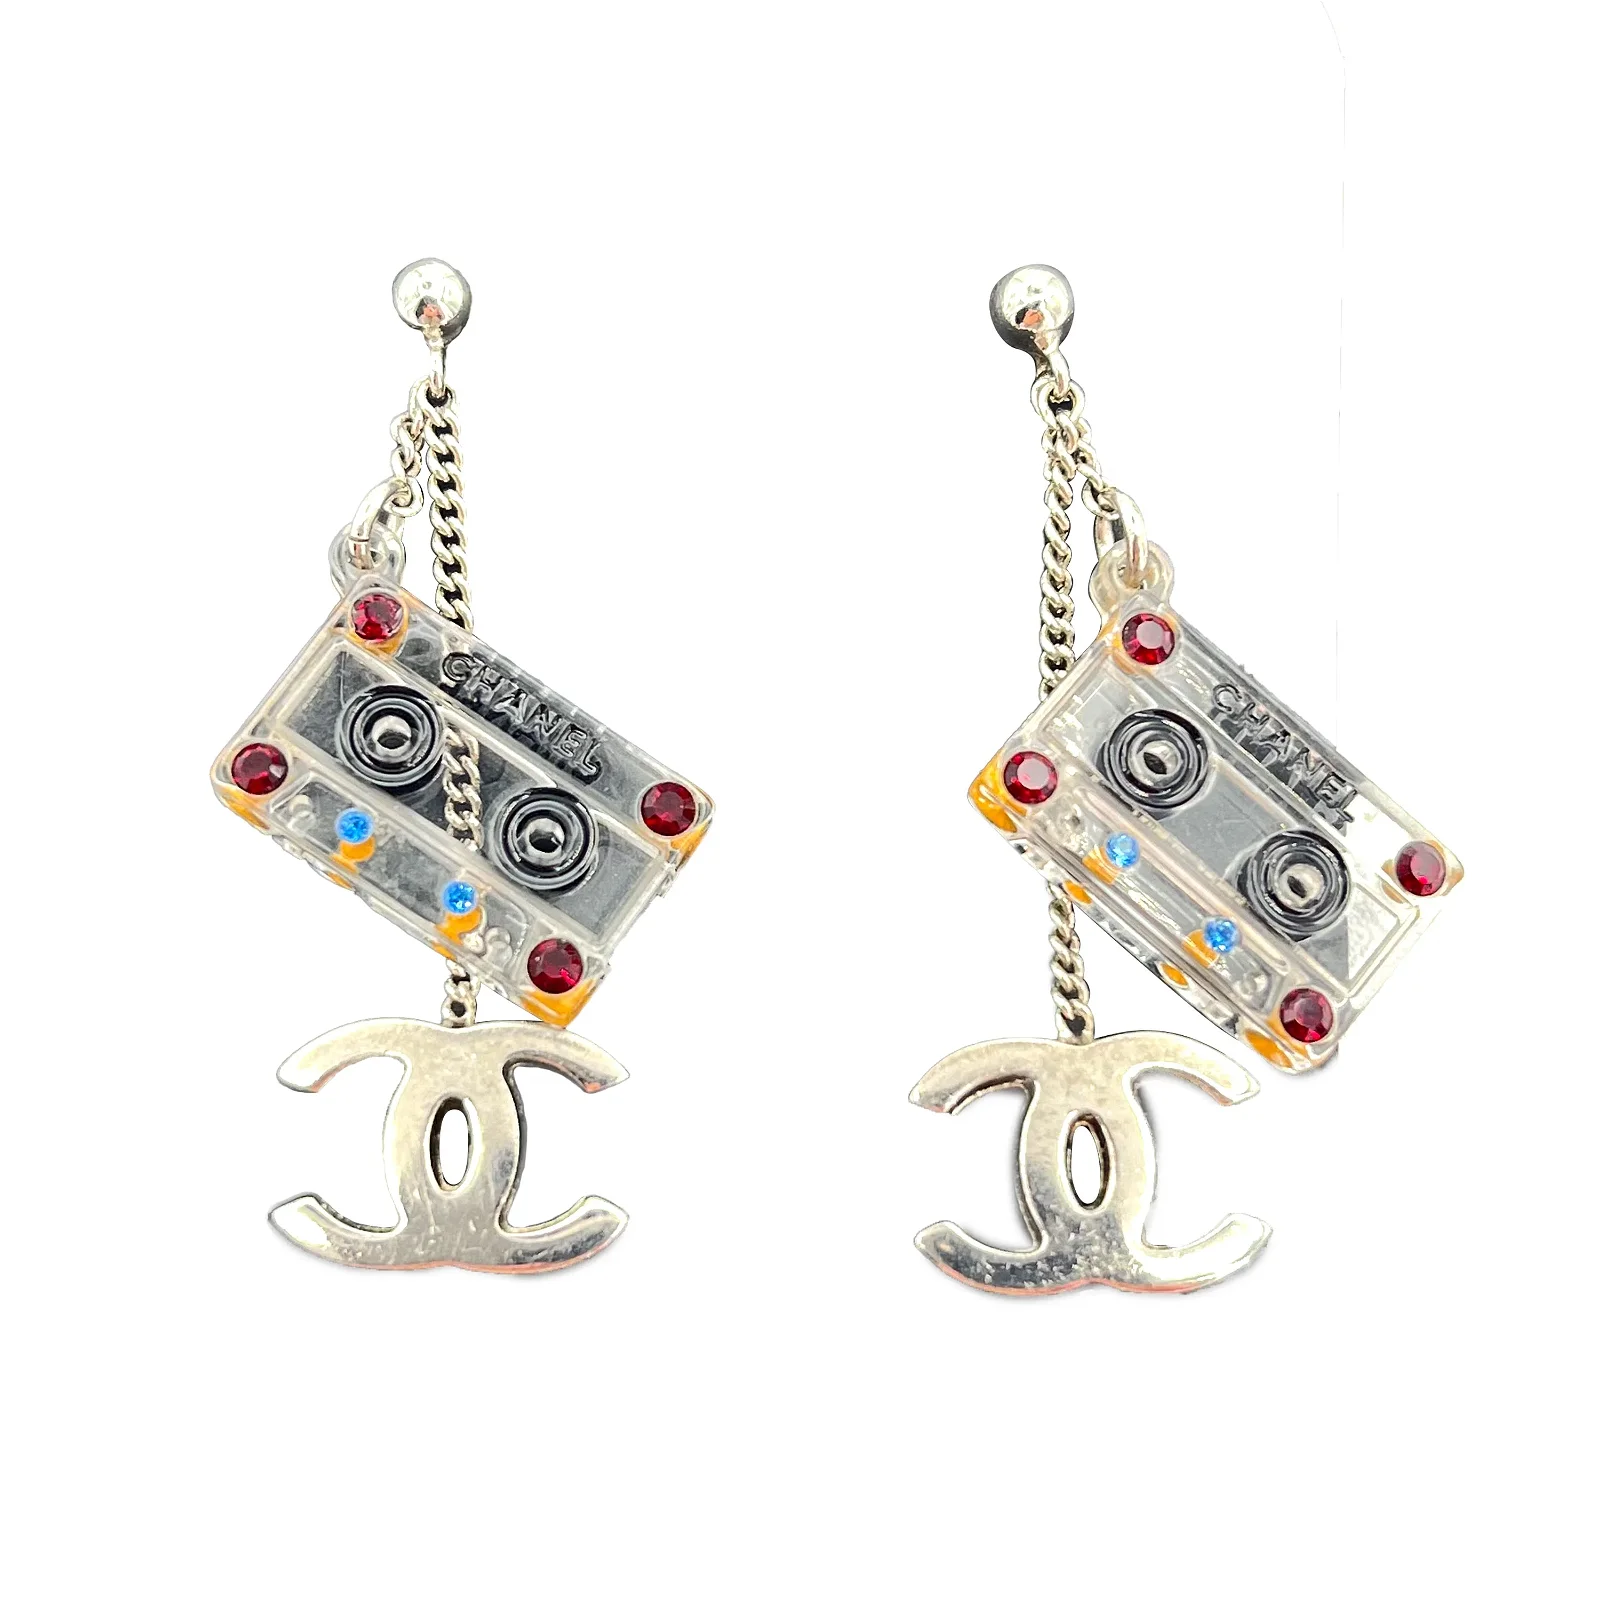 Image of CHANEL EARRINGS COCOMARK CASSETTE TAPE ACCESSORY